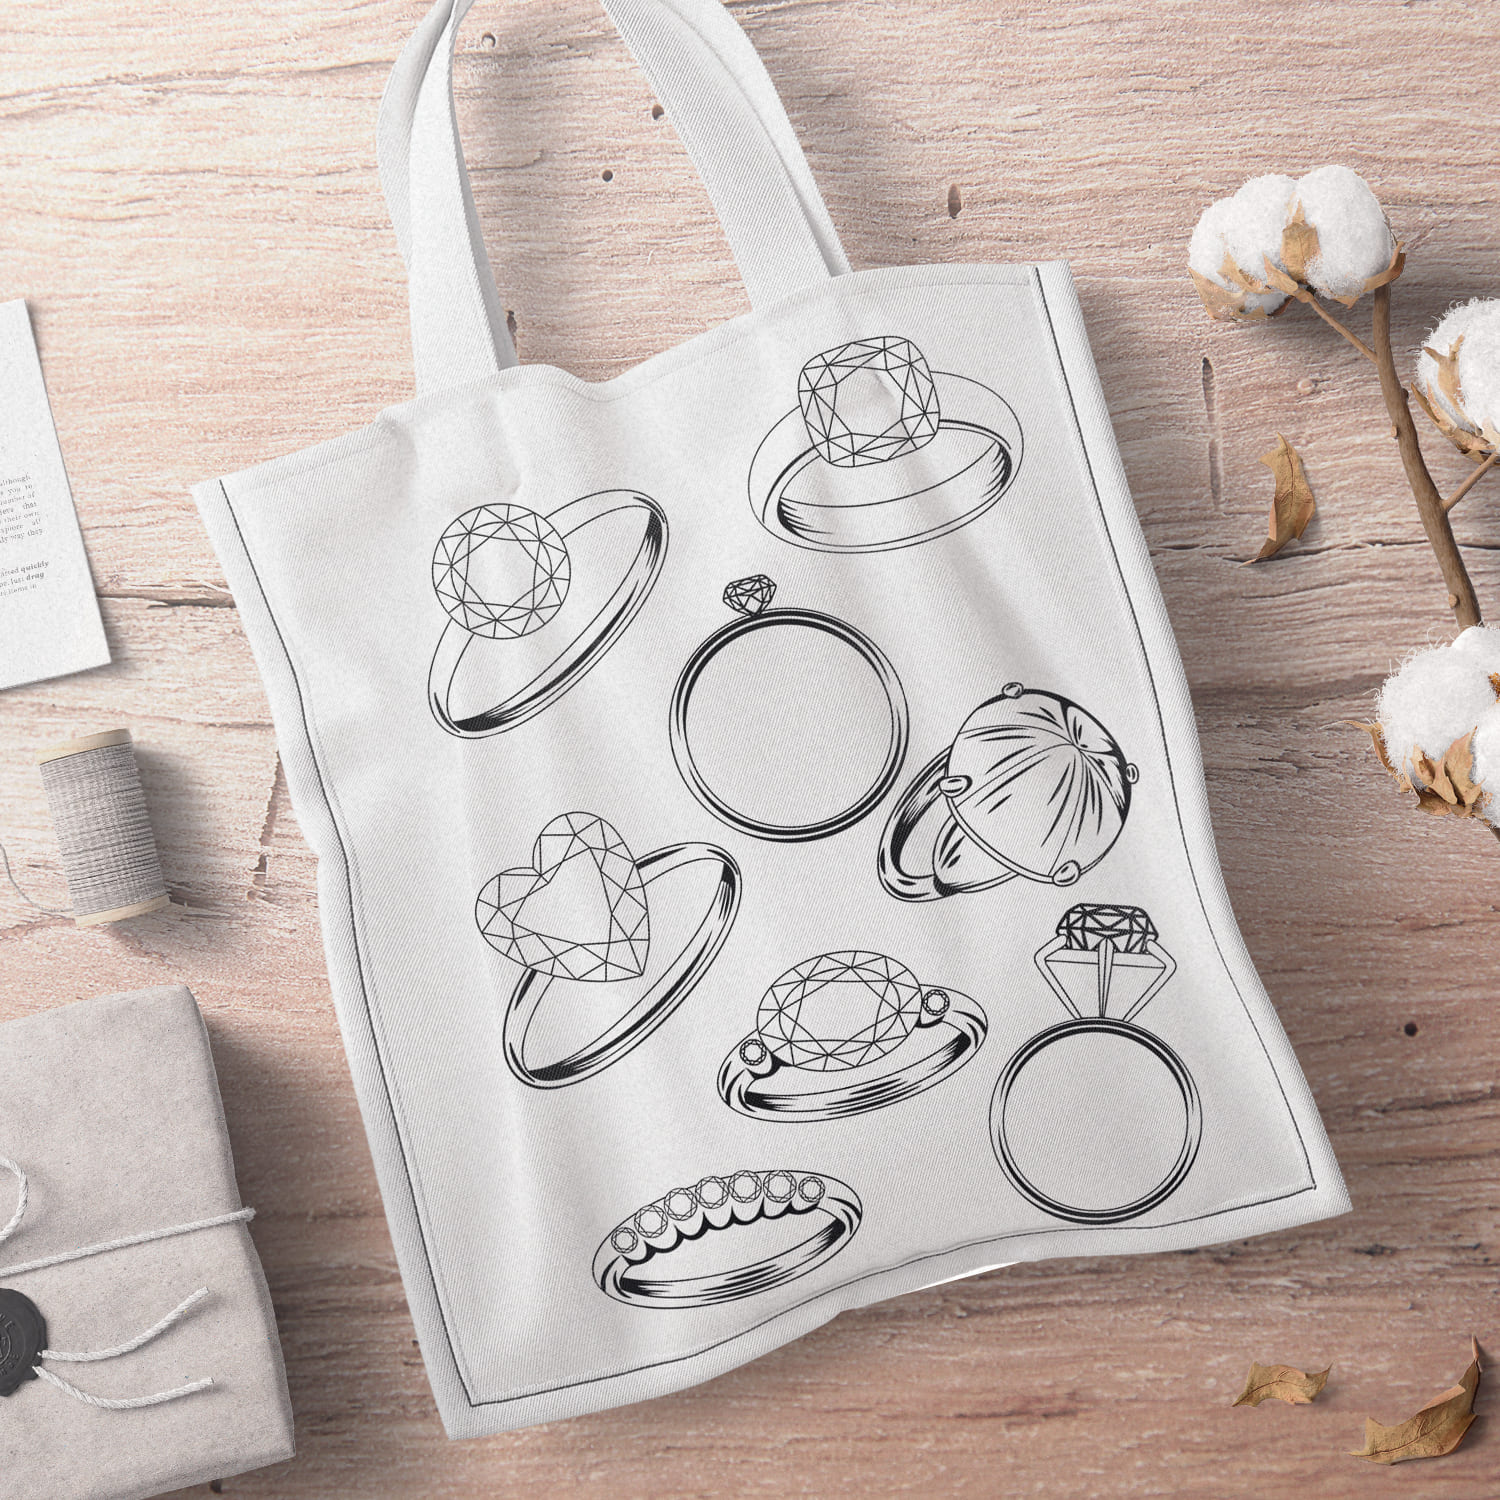 Shopping bag with outline diamond rings.